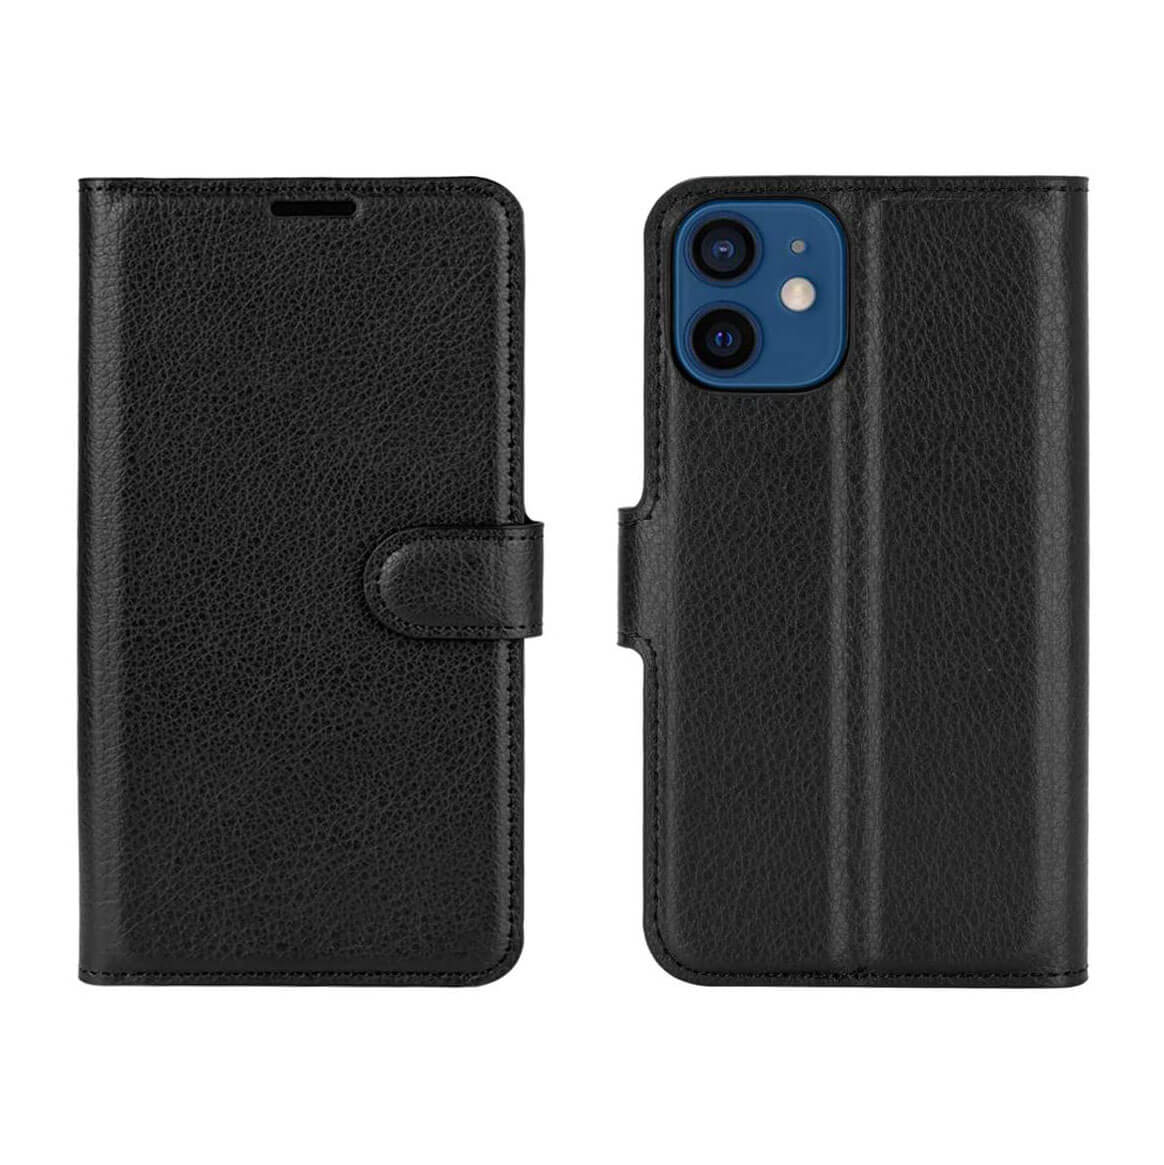 PU Leather Wallet Cover For Apple iPhone 12 Mini Case Holder Card Slots Black